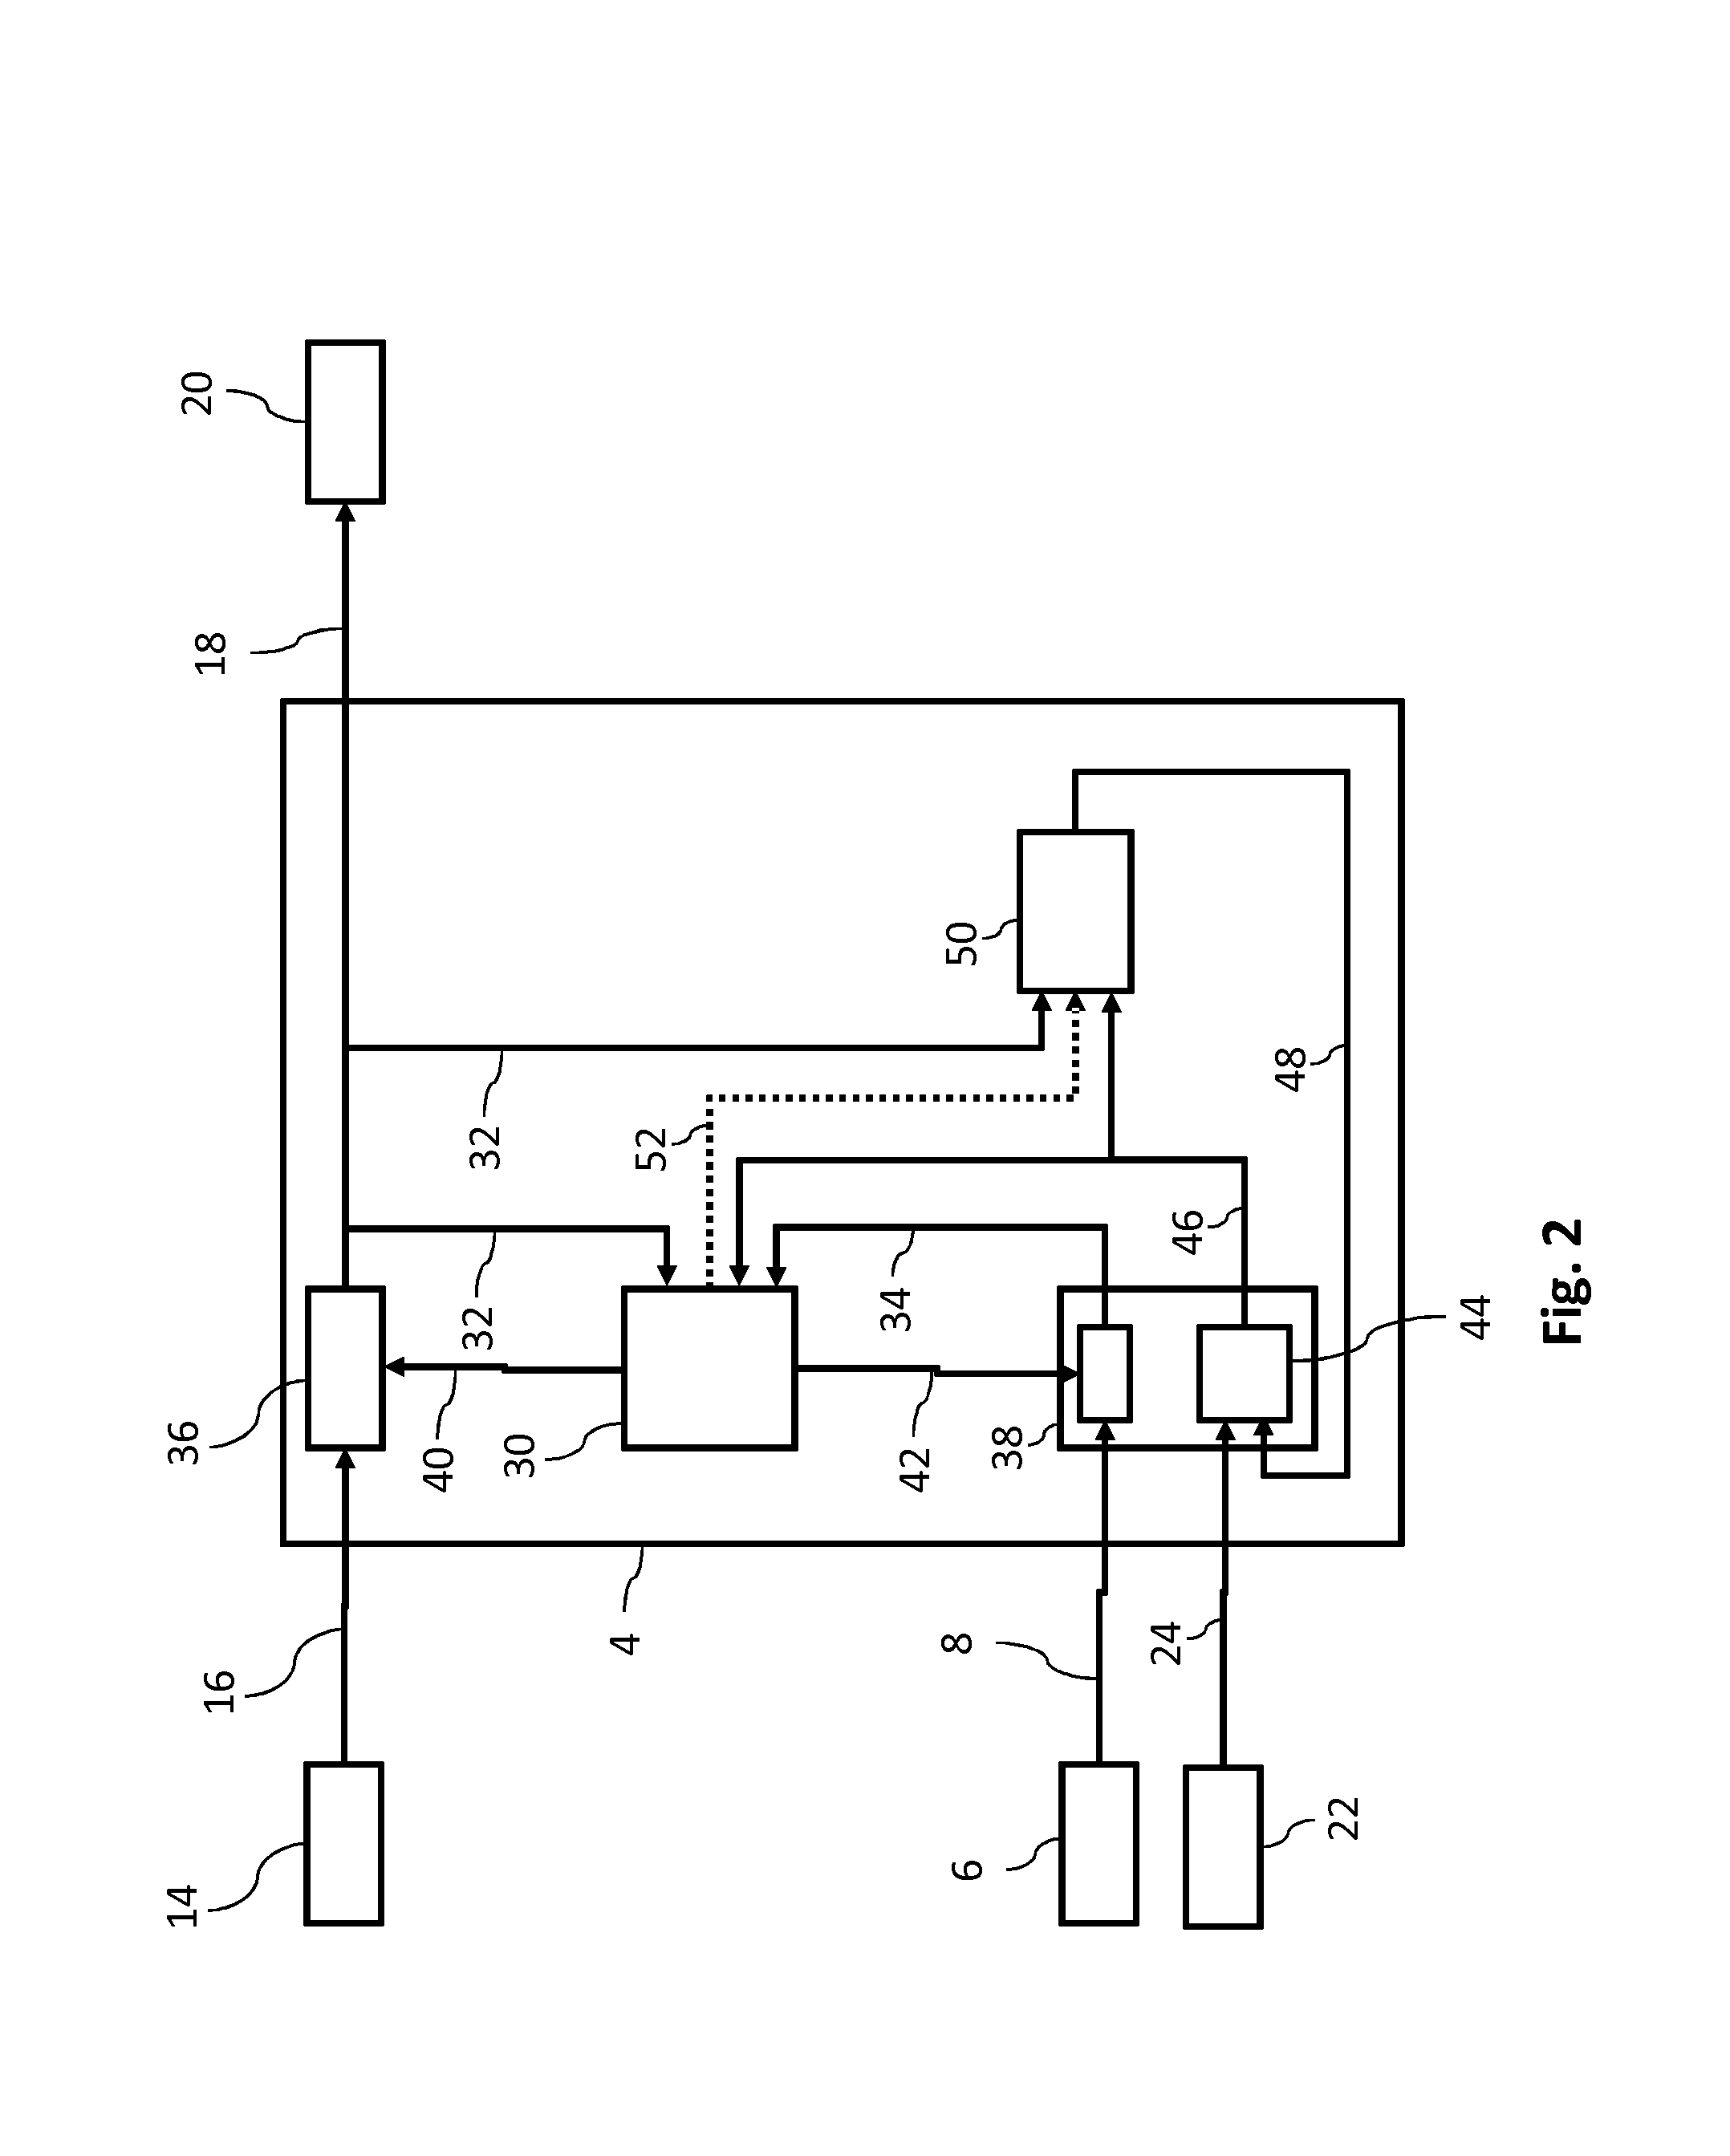 Method for Estimating Tire Parameters for a Vehicle